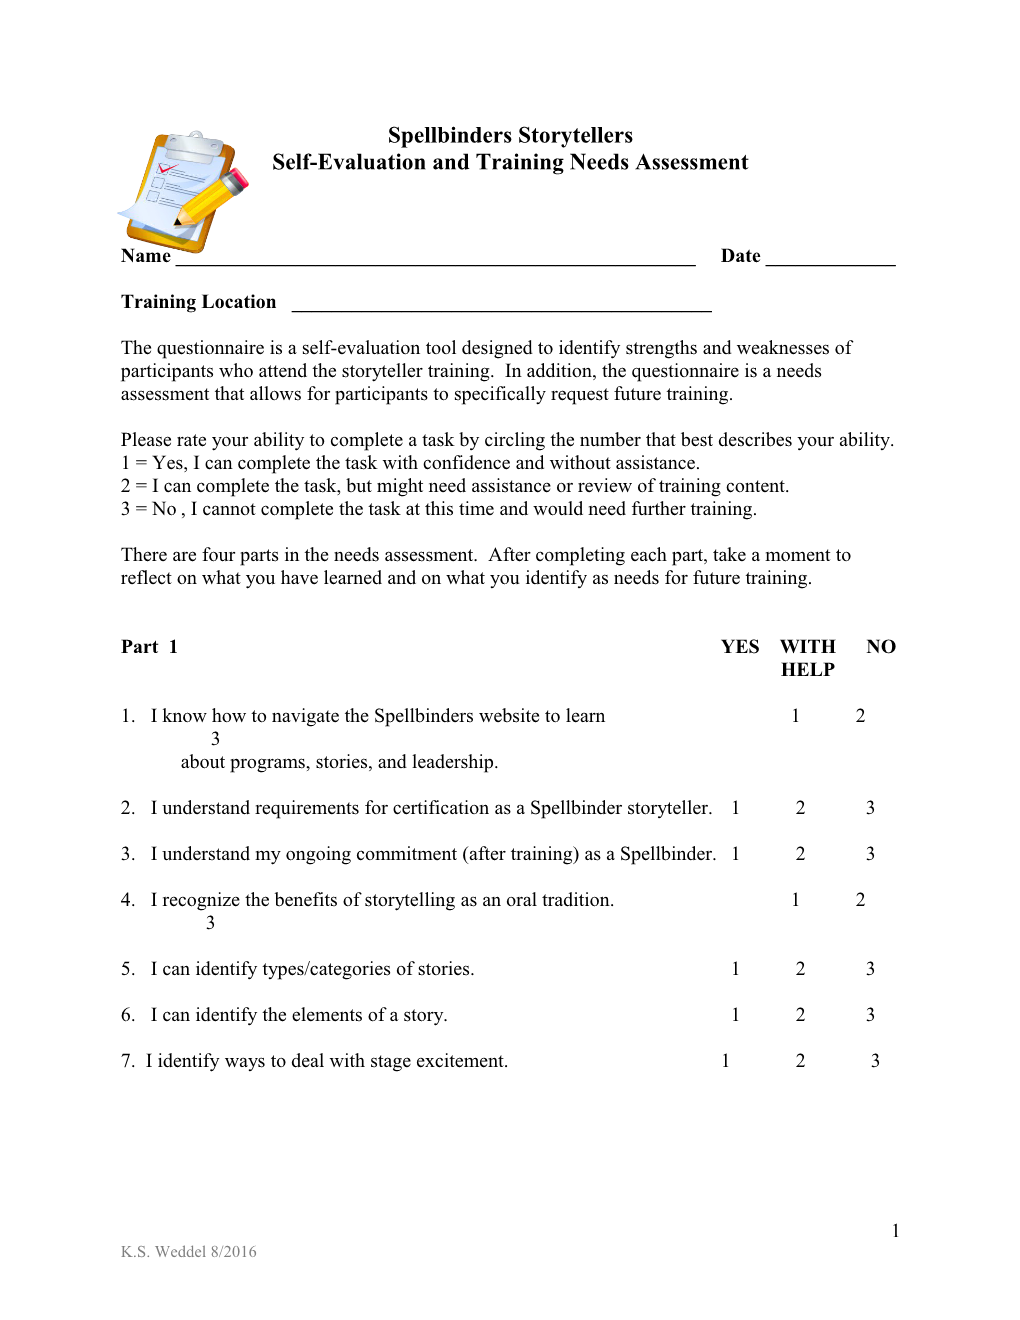 Self-Evaluation and Training Needs Assessment